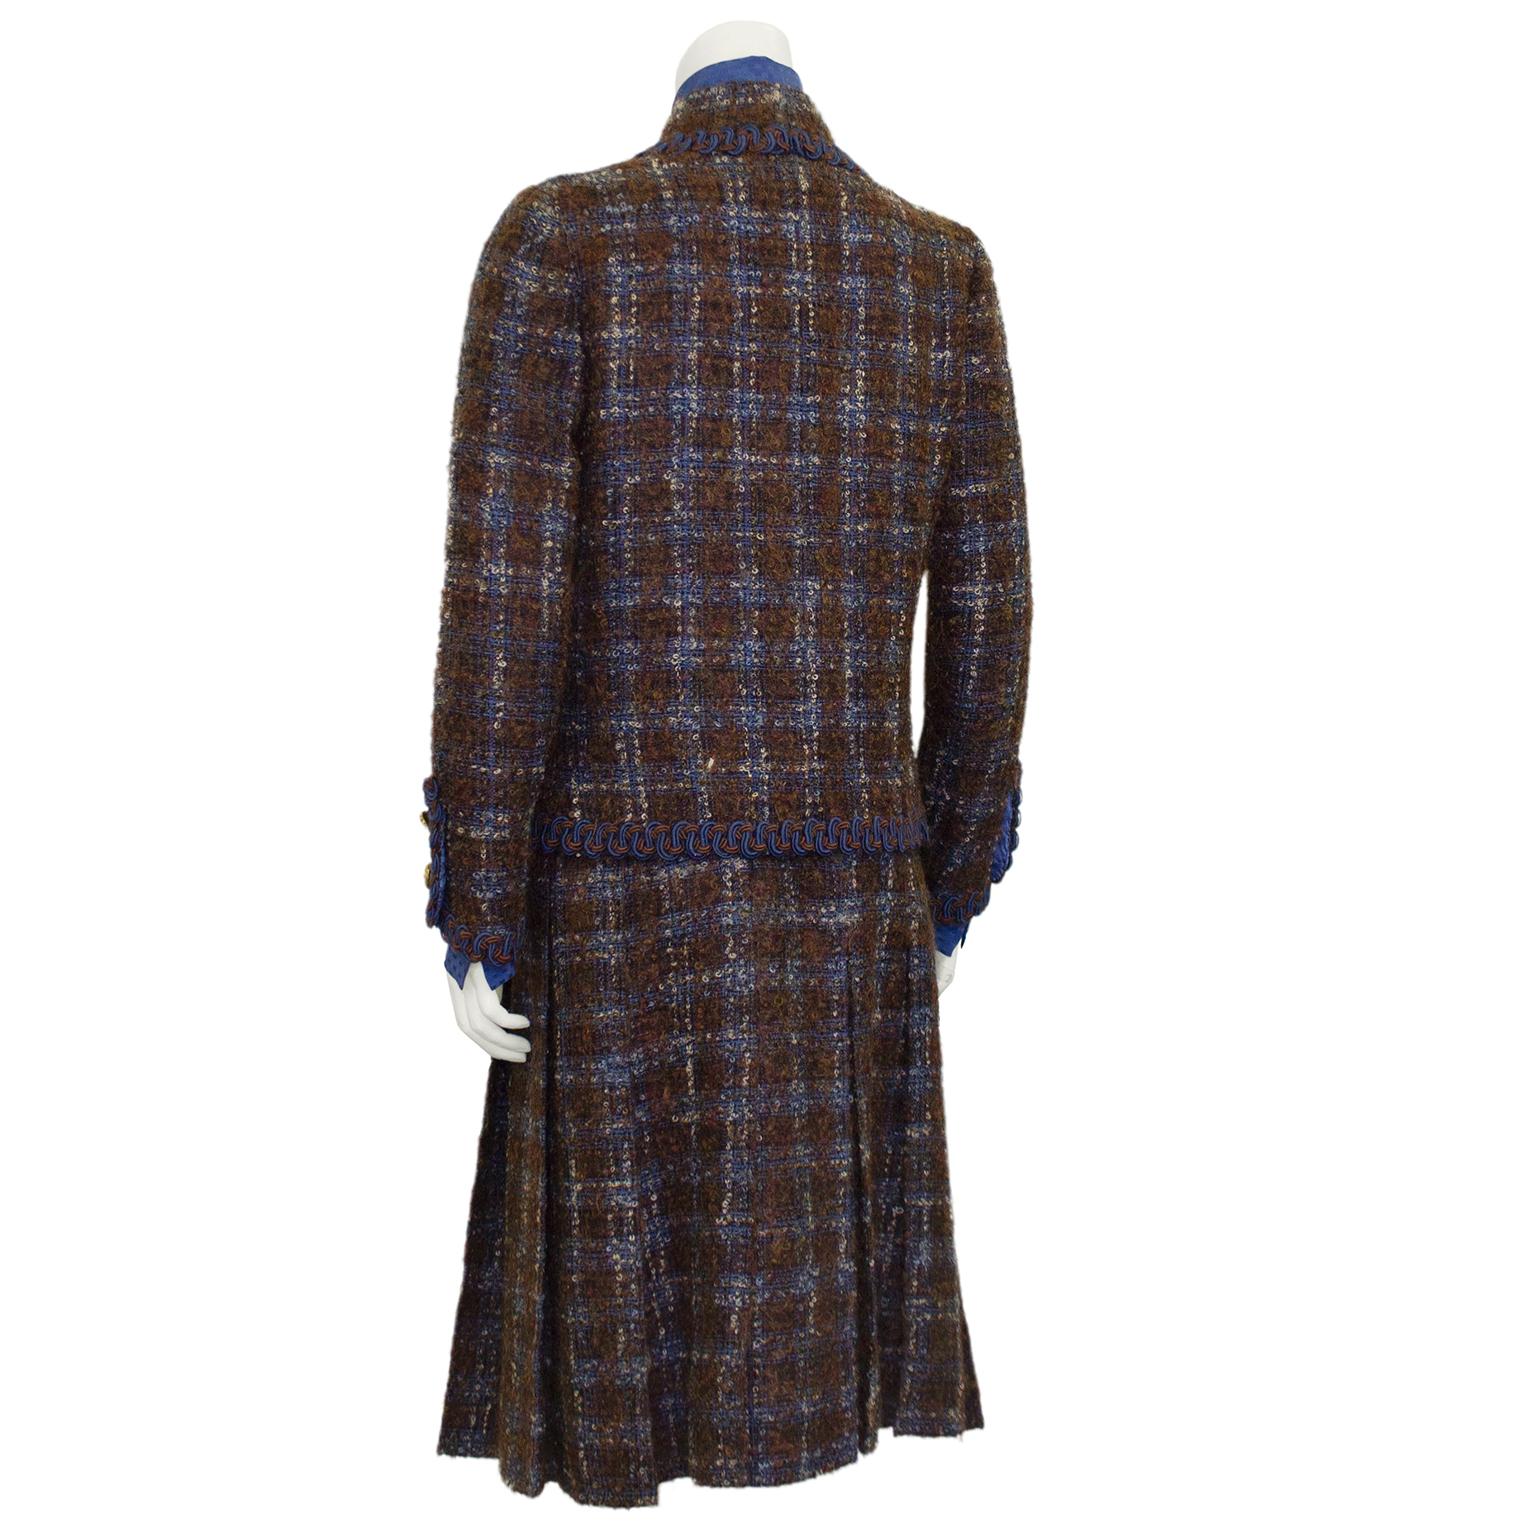 Women's 1981 Chanel Haute Couture Blue and Brown Tweed 5 Piece Skirt Suit